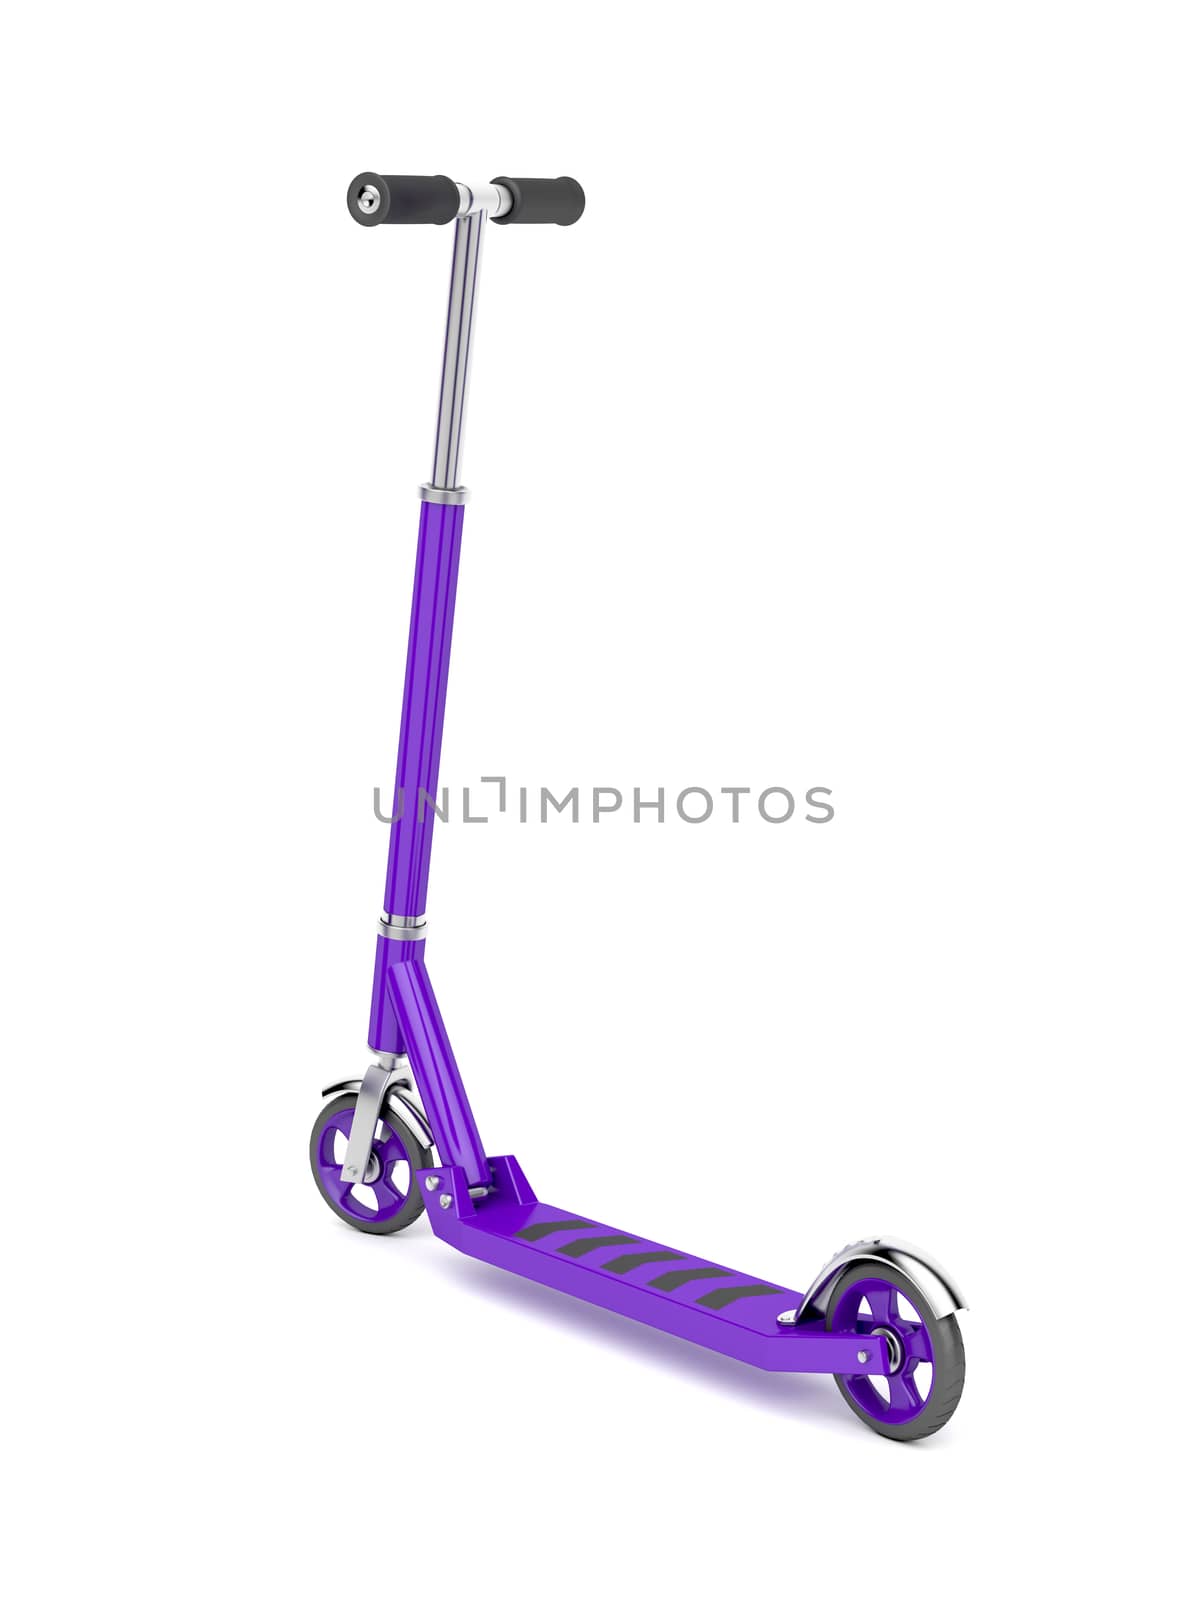 Push scooter on white background 